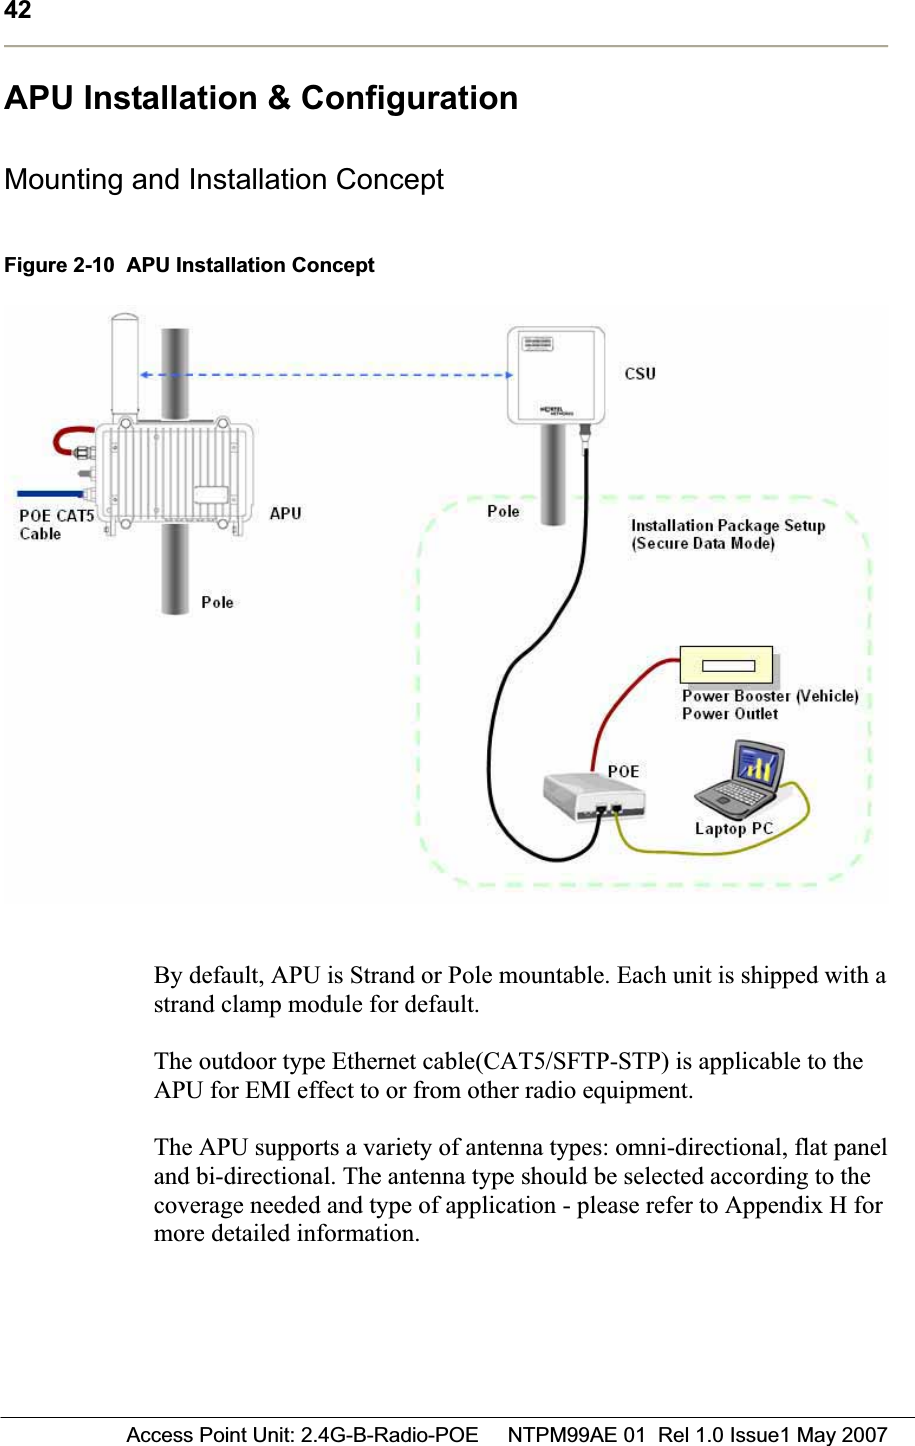 42 Access Point Unit: 2.4G-B-Radio-POE     NTPM99AE 01  Rel 1.0 Issue1 May 2007APU Installation &amp; Configuration Mounting and Installation ConceptFigure 2-10  APU Installation Concept  By default, APU is Strand or Pole mountable. Each unit is shipped with a strand clamp module for default.  The outdoor type Ethernet cable(CAT5/SFTP-STP) is applicable to the APU for EMI effect to or from other radio equipment.  The APU supports a variety of antenna types: omni-directional, flat panel and bi-directional. The antenna type should be selected according to the coverage needed and type of application - please refer to Appendix H for more detailed information.  